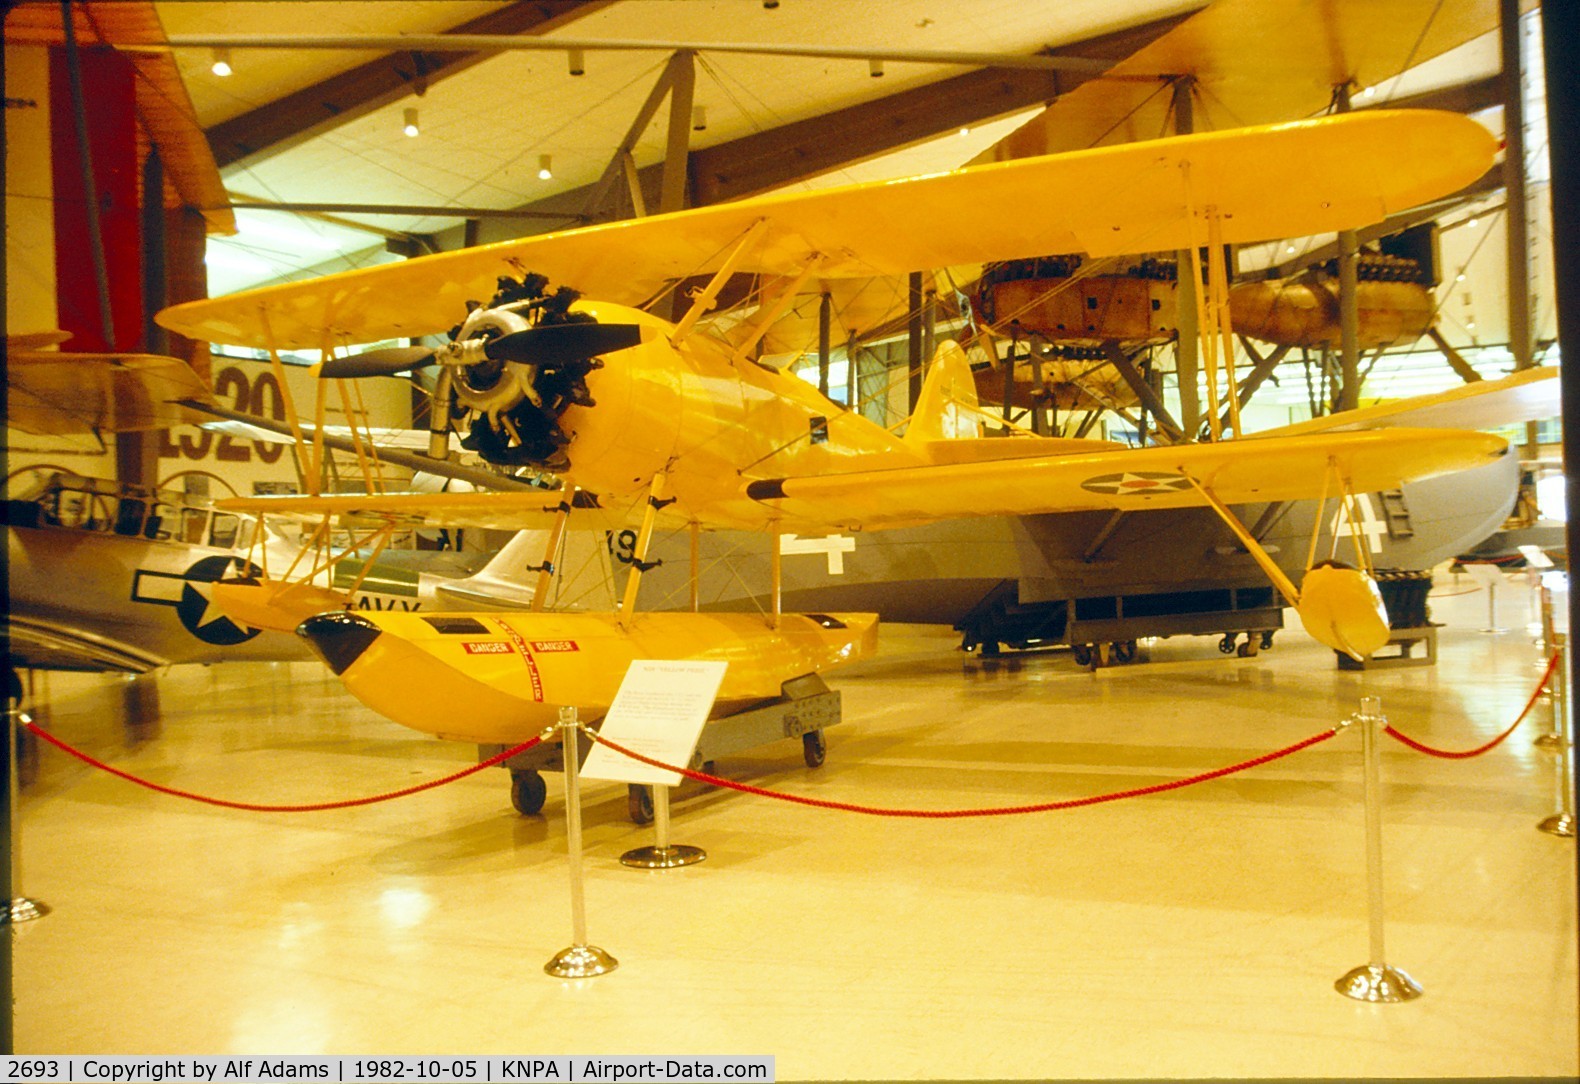 2693, Naval Aircraft Factory N3N-3 C/N Not found 2693, Shown on the floor of the National Naval Aviation Museum in 1982.